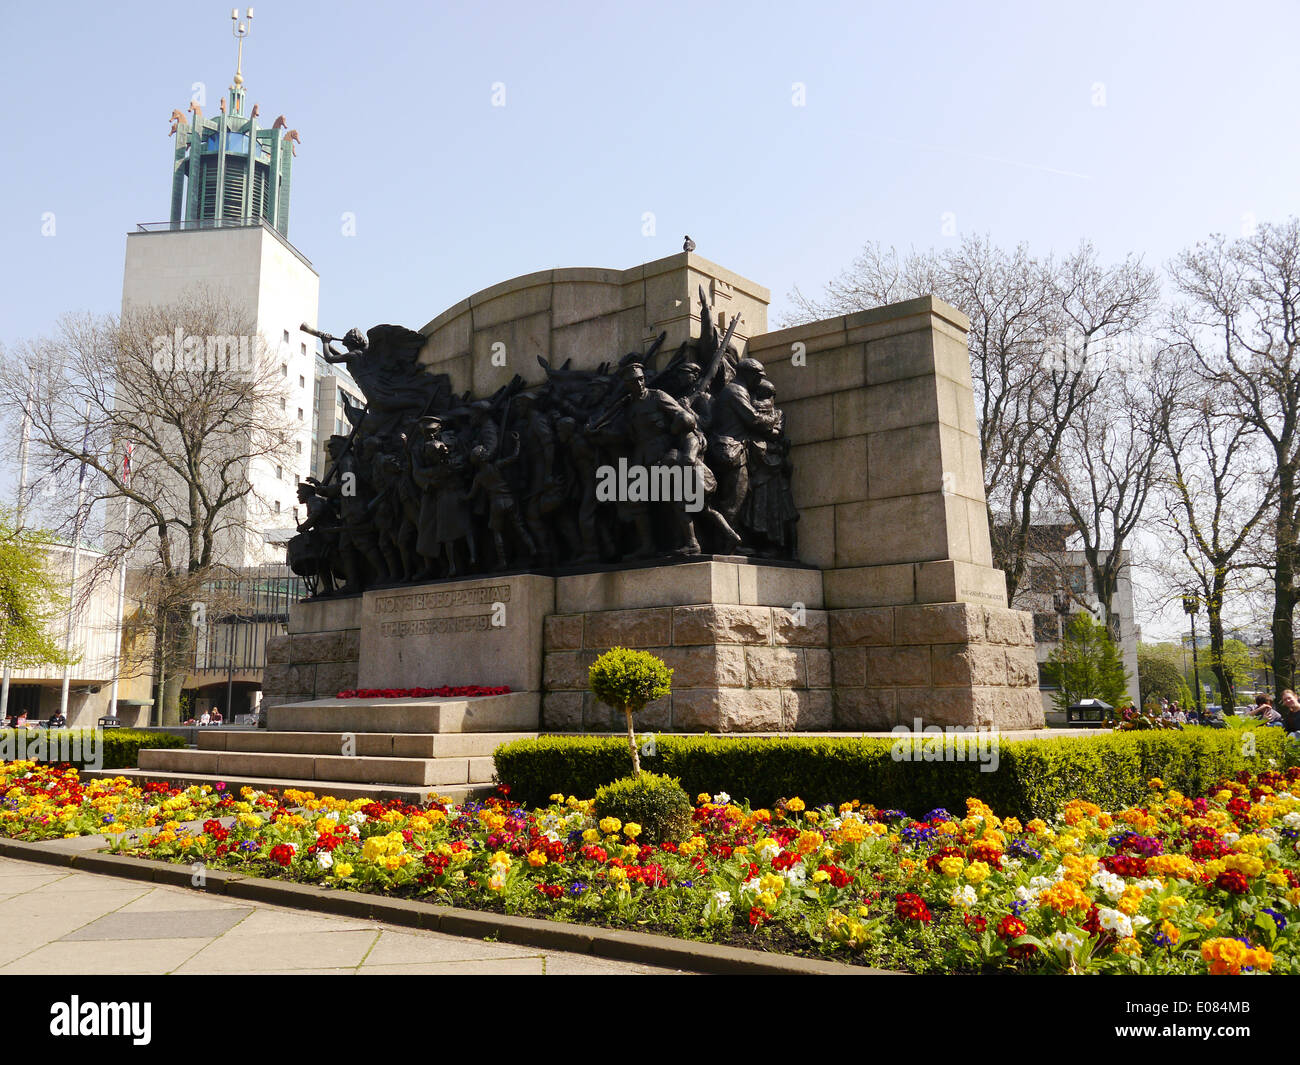 WW1 memorial con Newcastle upon Tyne Civic Center in background Foto Stock